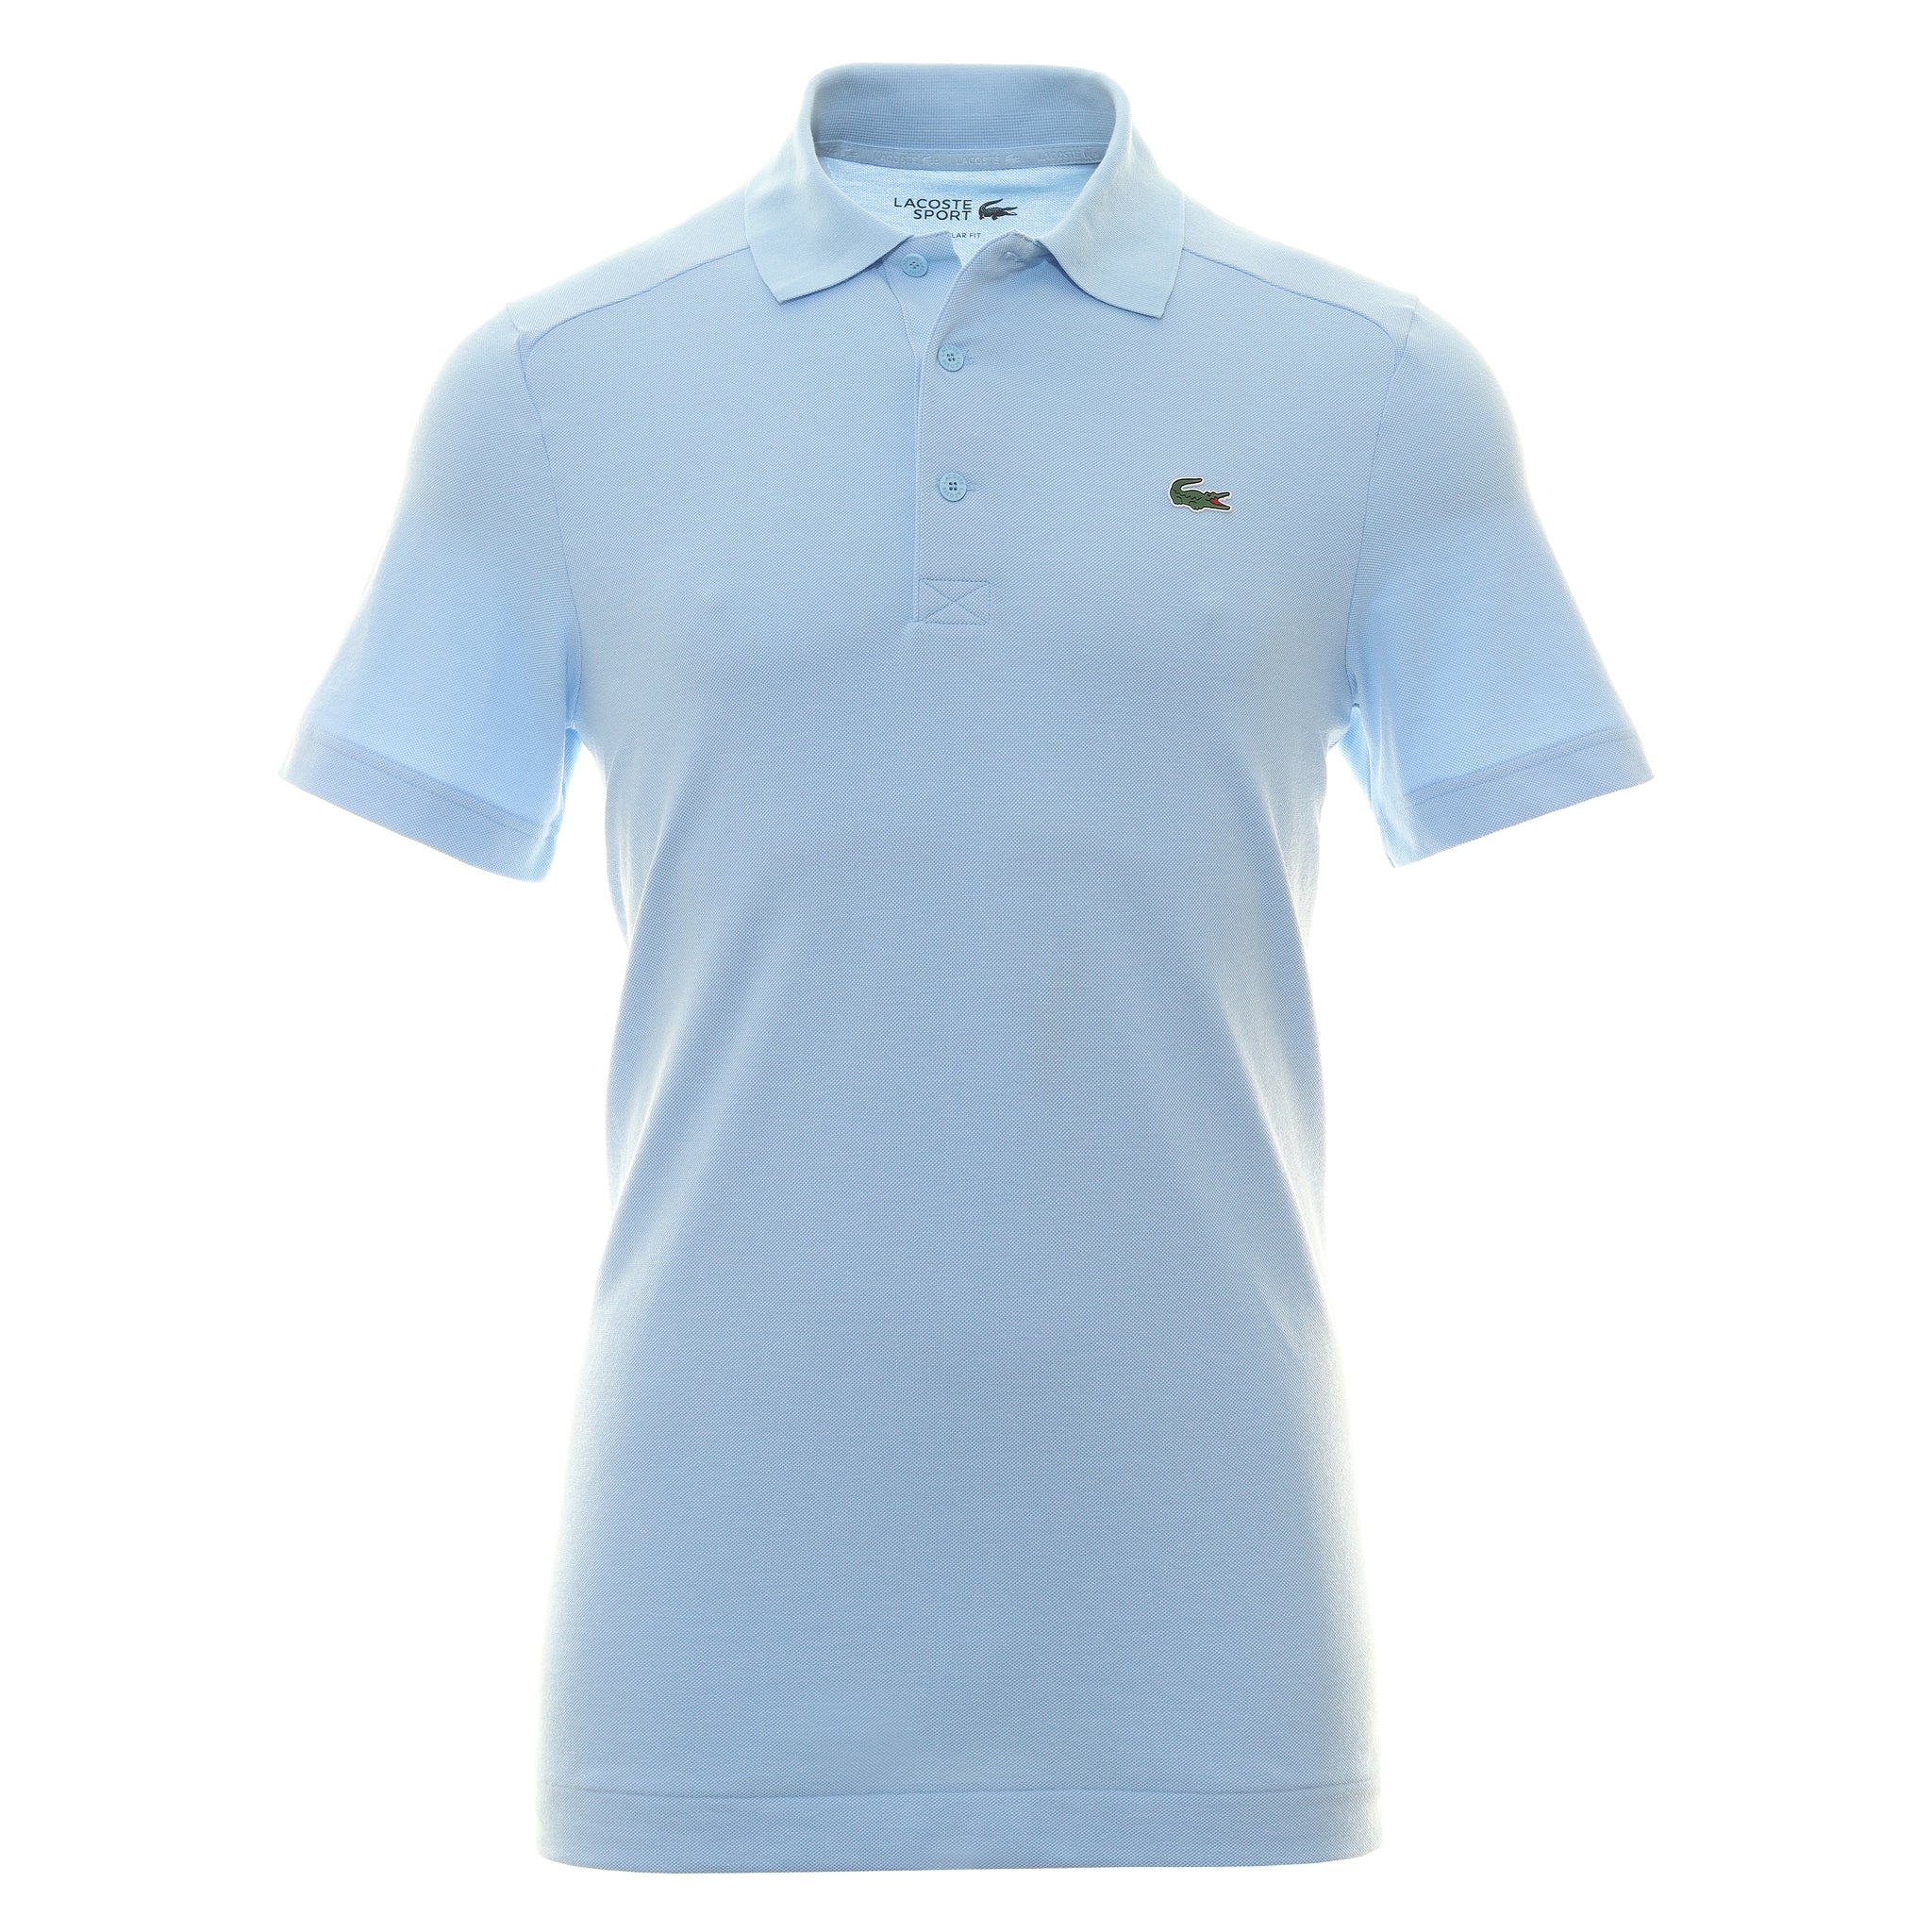 lacoste-sport-pique-polo-shirt-dh9309-overview-blue-gn2-function18